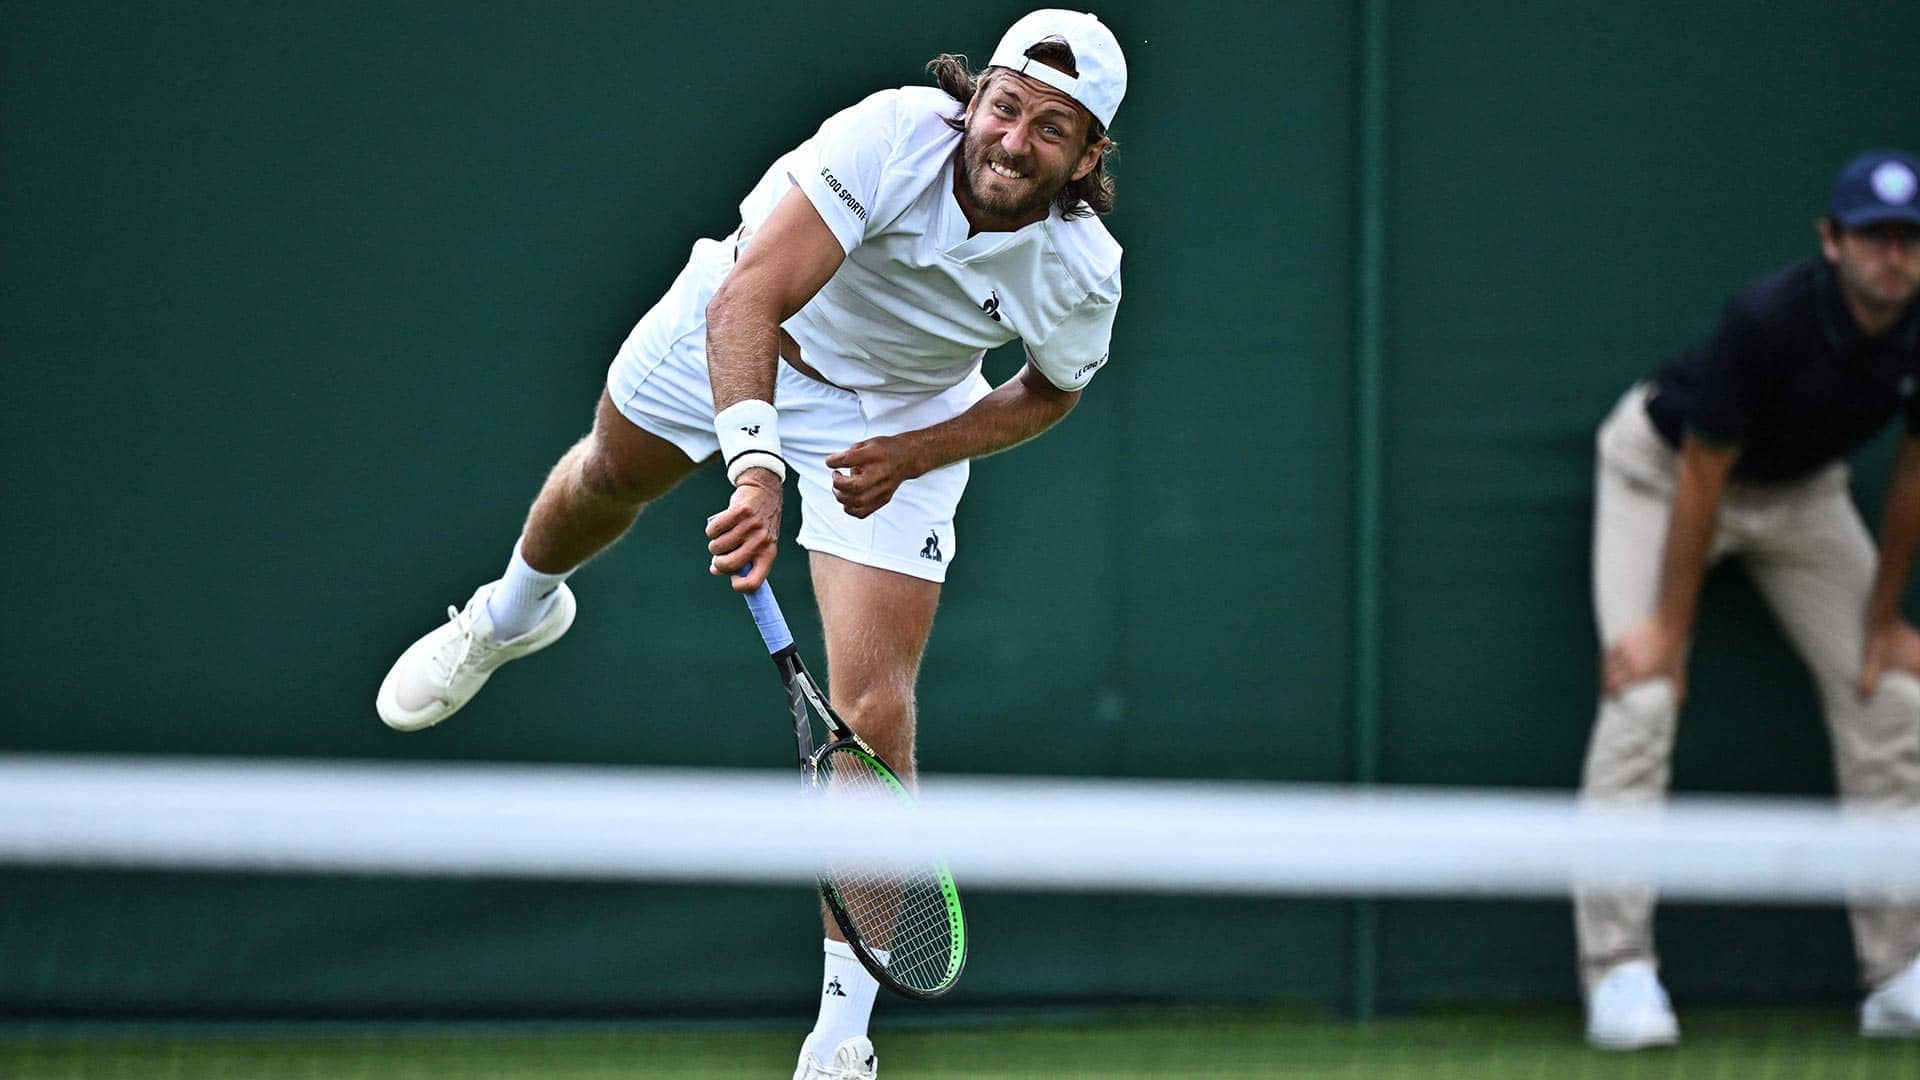 Pouille headlines quartet of French qualifiers at Wimbledon